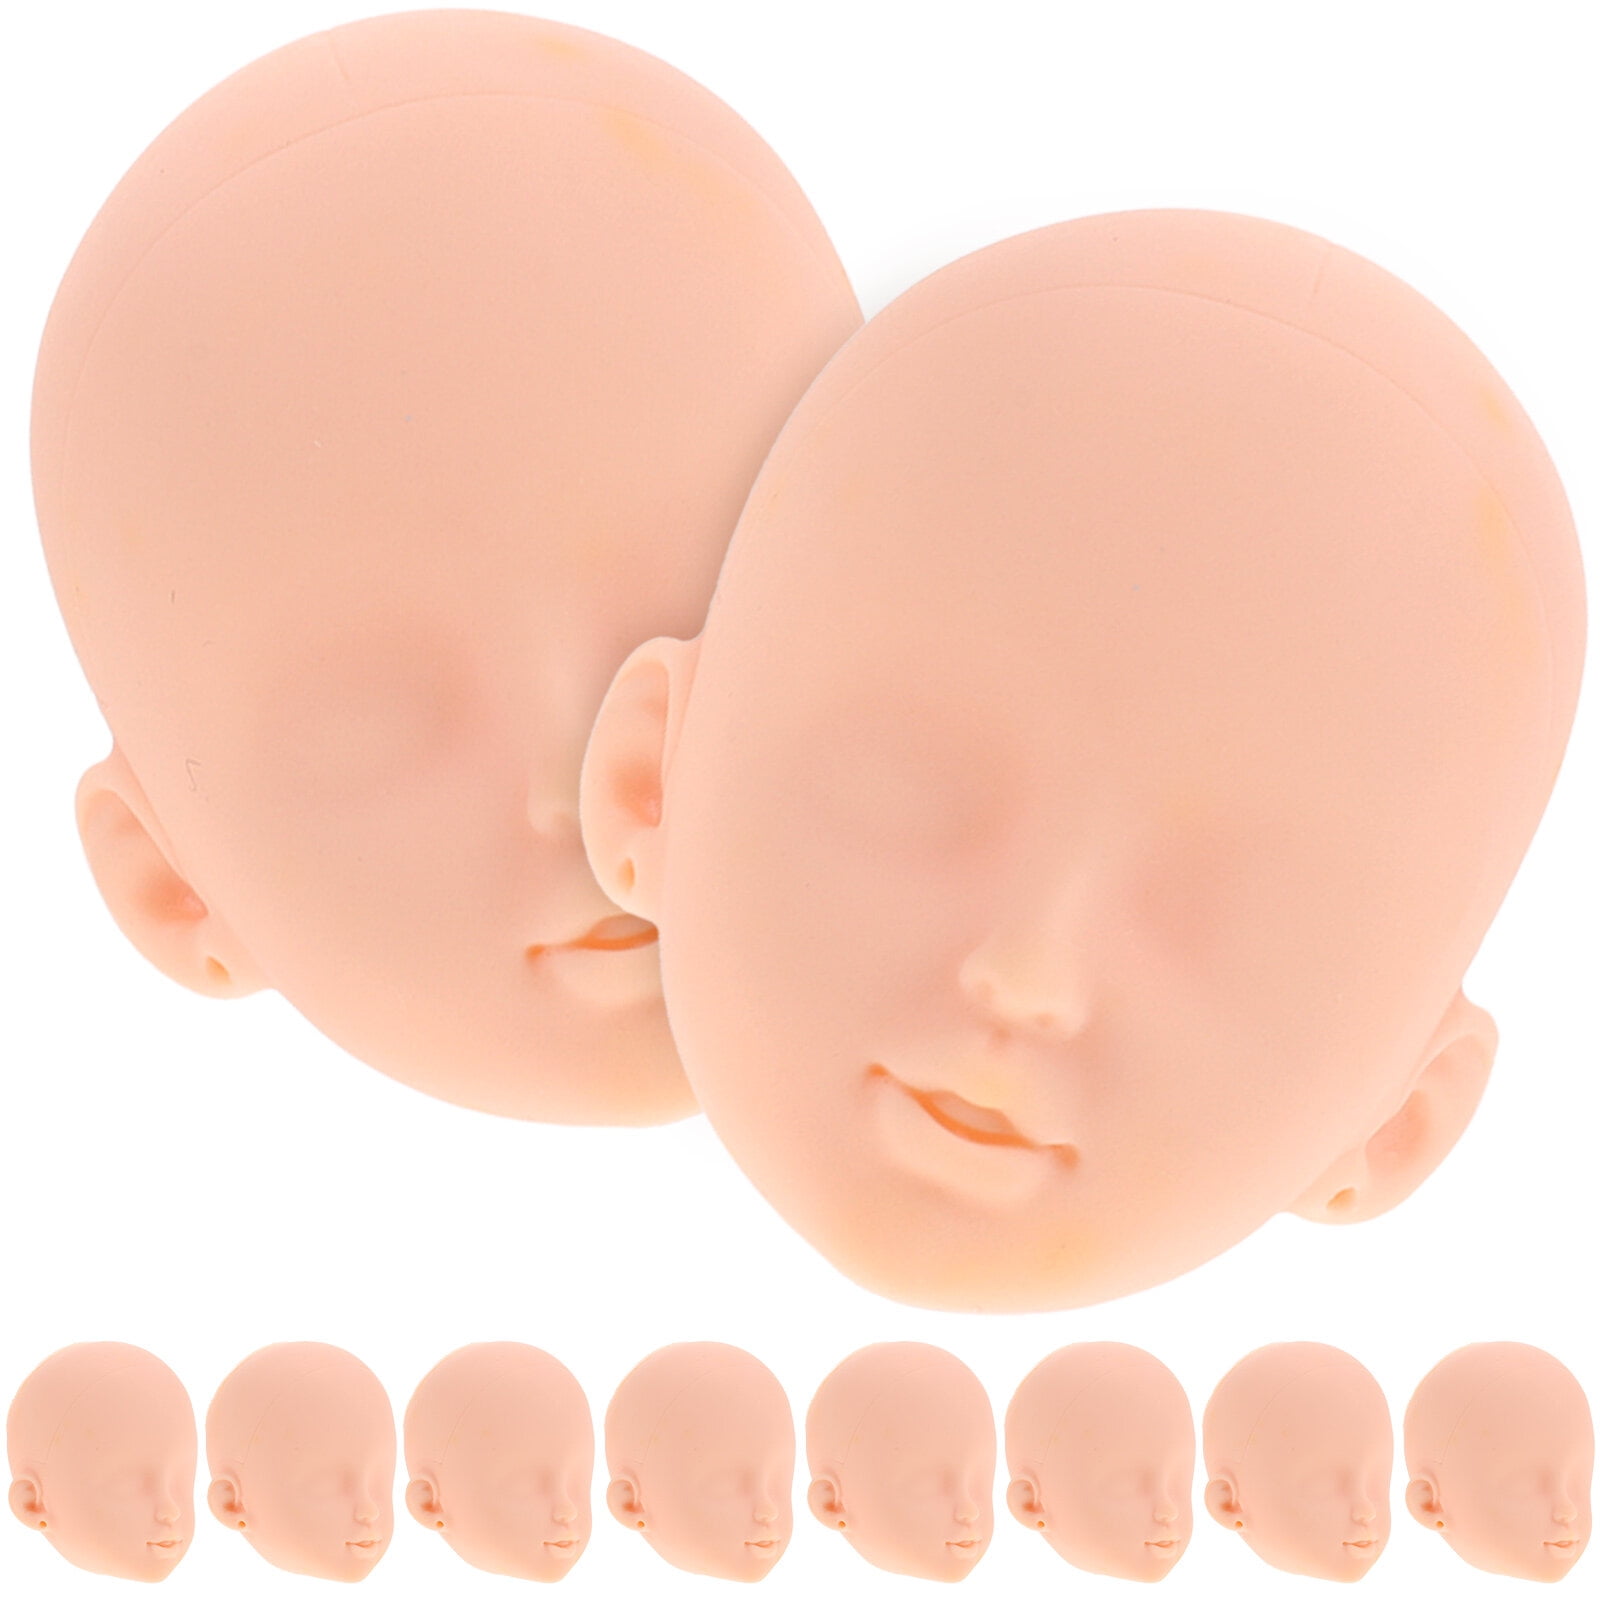 jojofuny 20pcs Vinyl Doll Heads for Crafts 1/6 Doll Head Doll Repainting  Practice Makeup DIY Baby Mannequin Doll Heads for Baby Shower